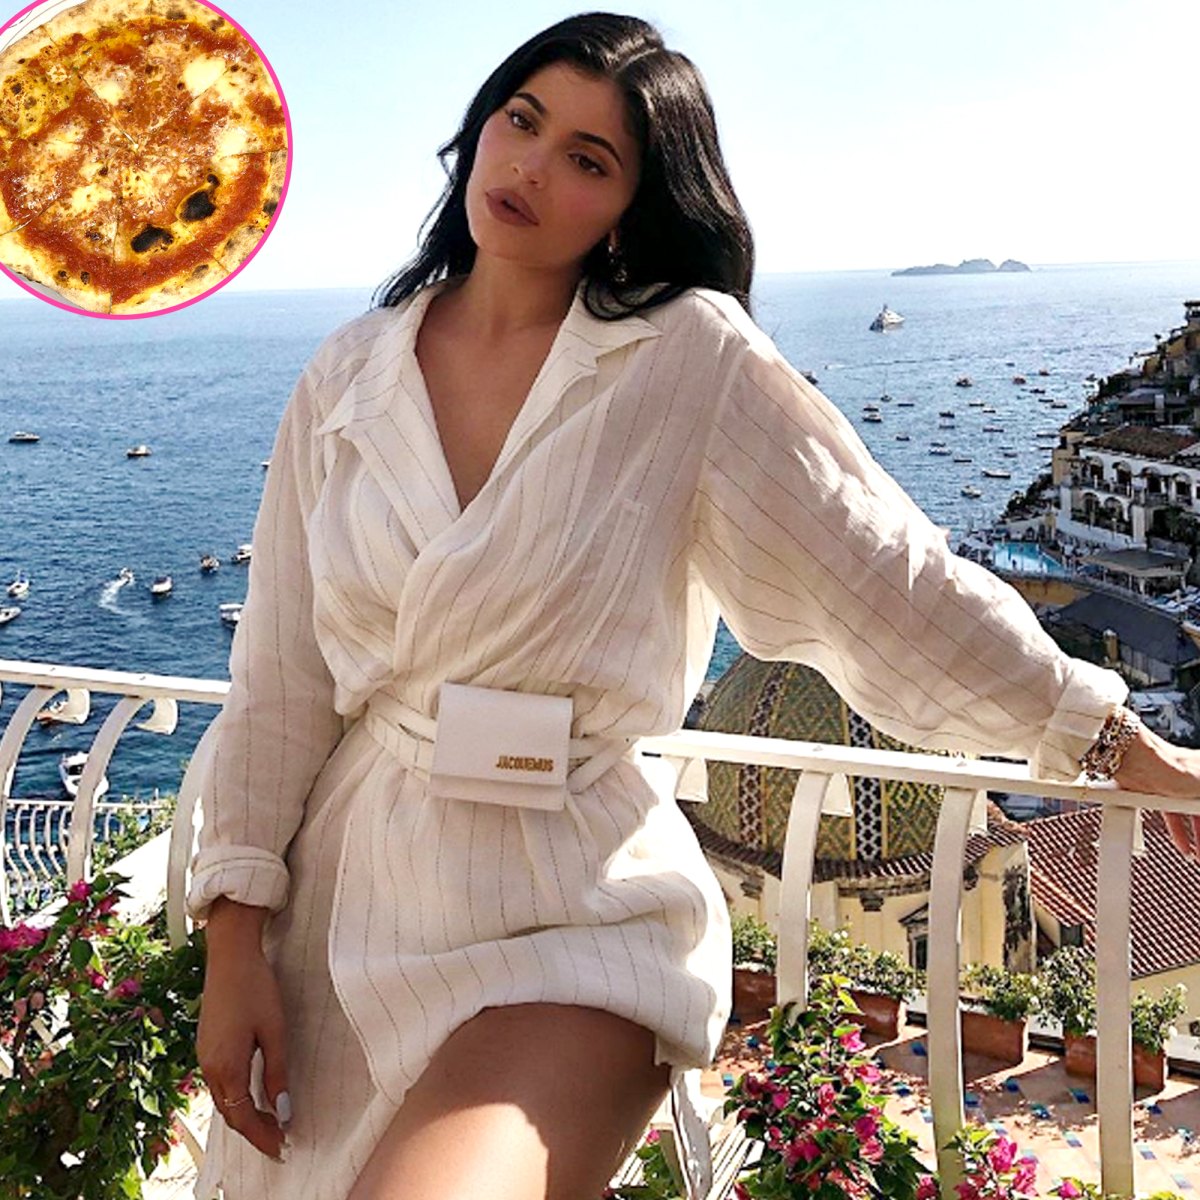 Kylie Jenner’s Birthday Trip to Italy: See What She’s Eating